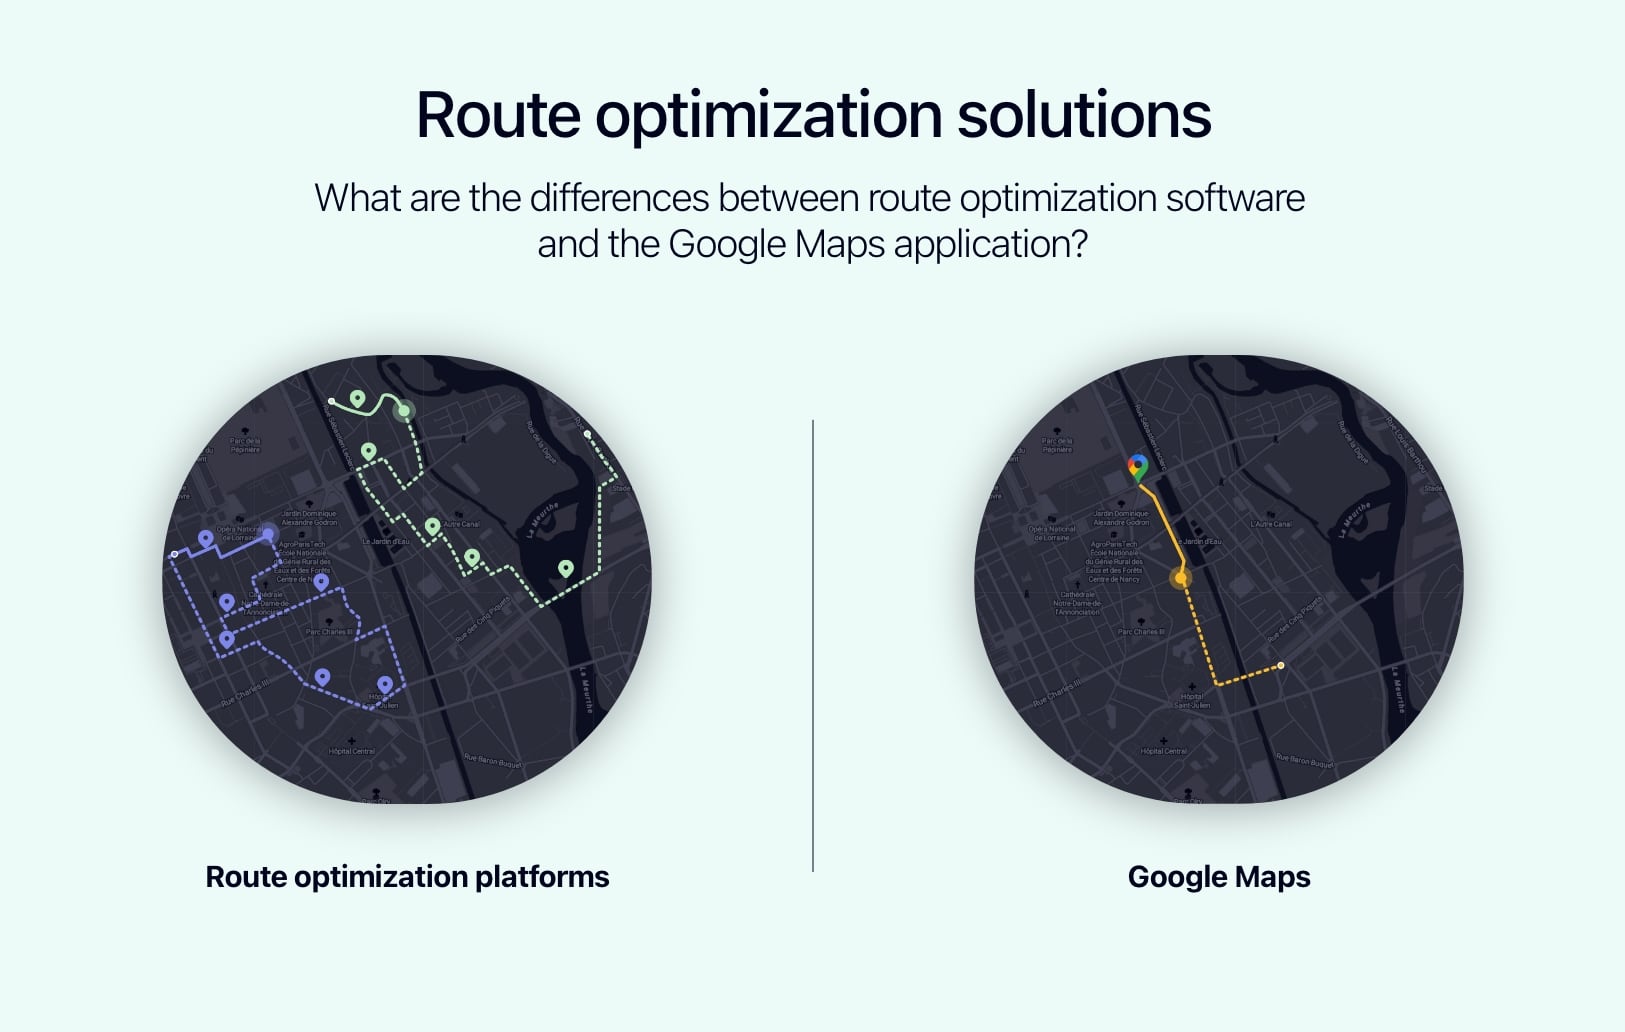 Diagram showing the differences between Google Maps and a route optimization platform.